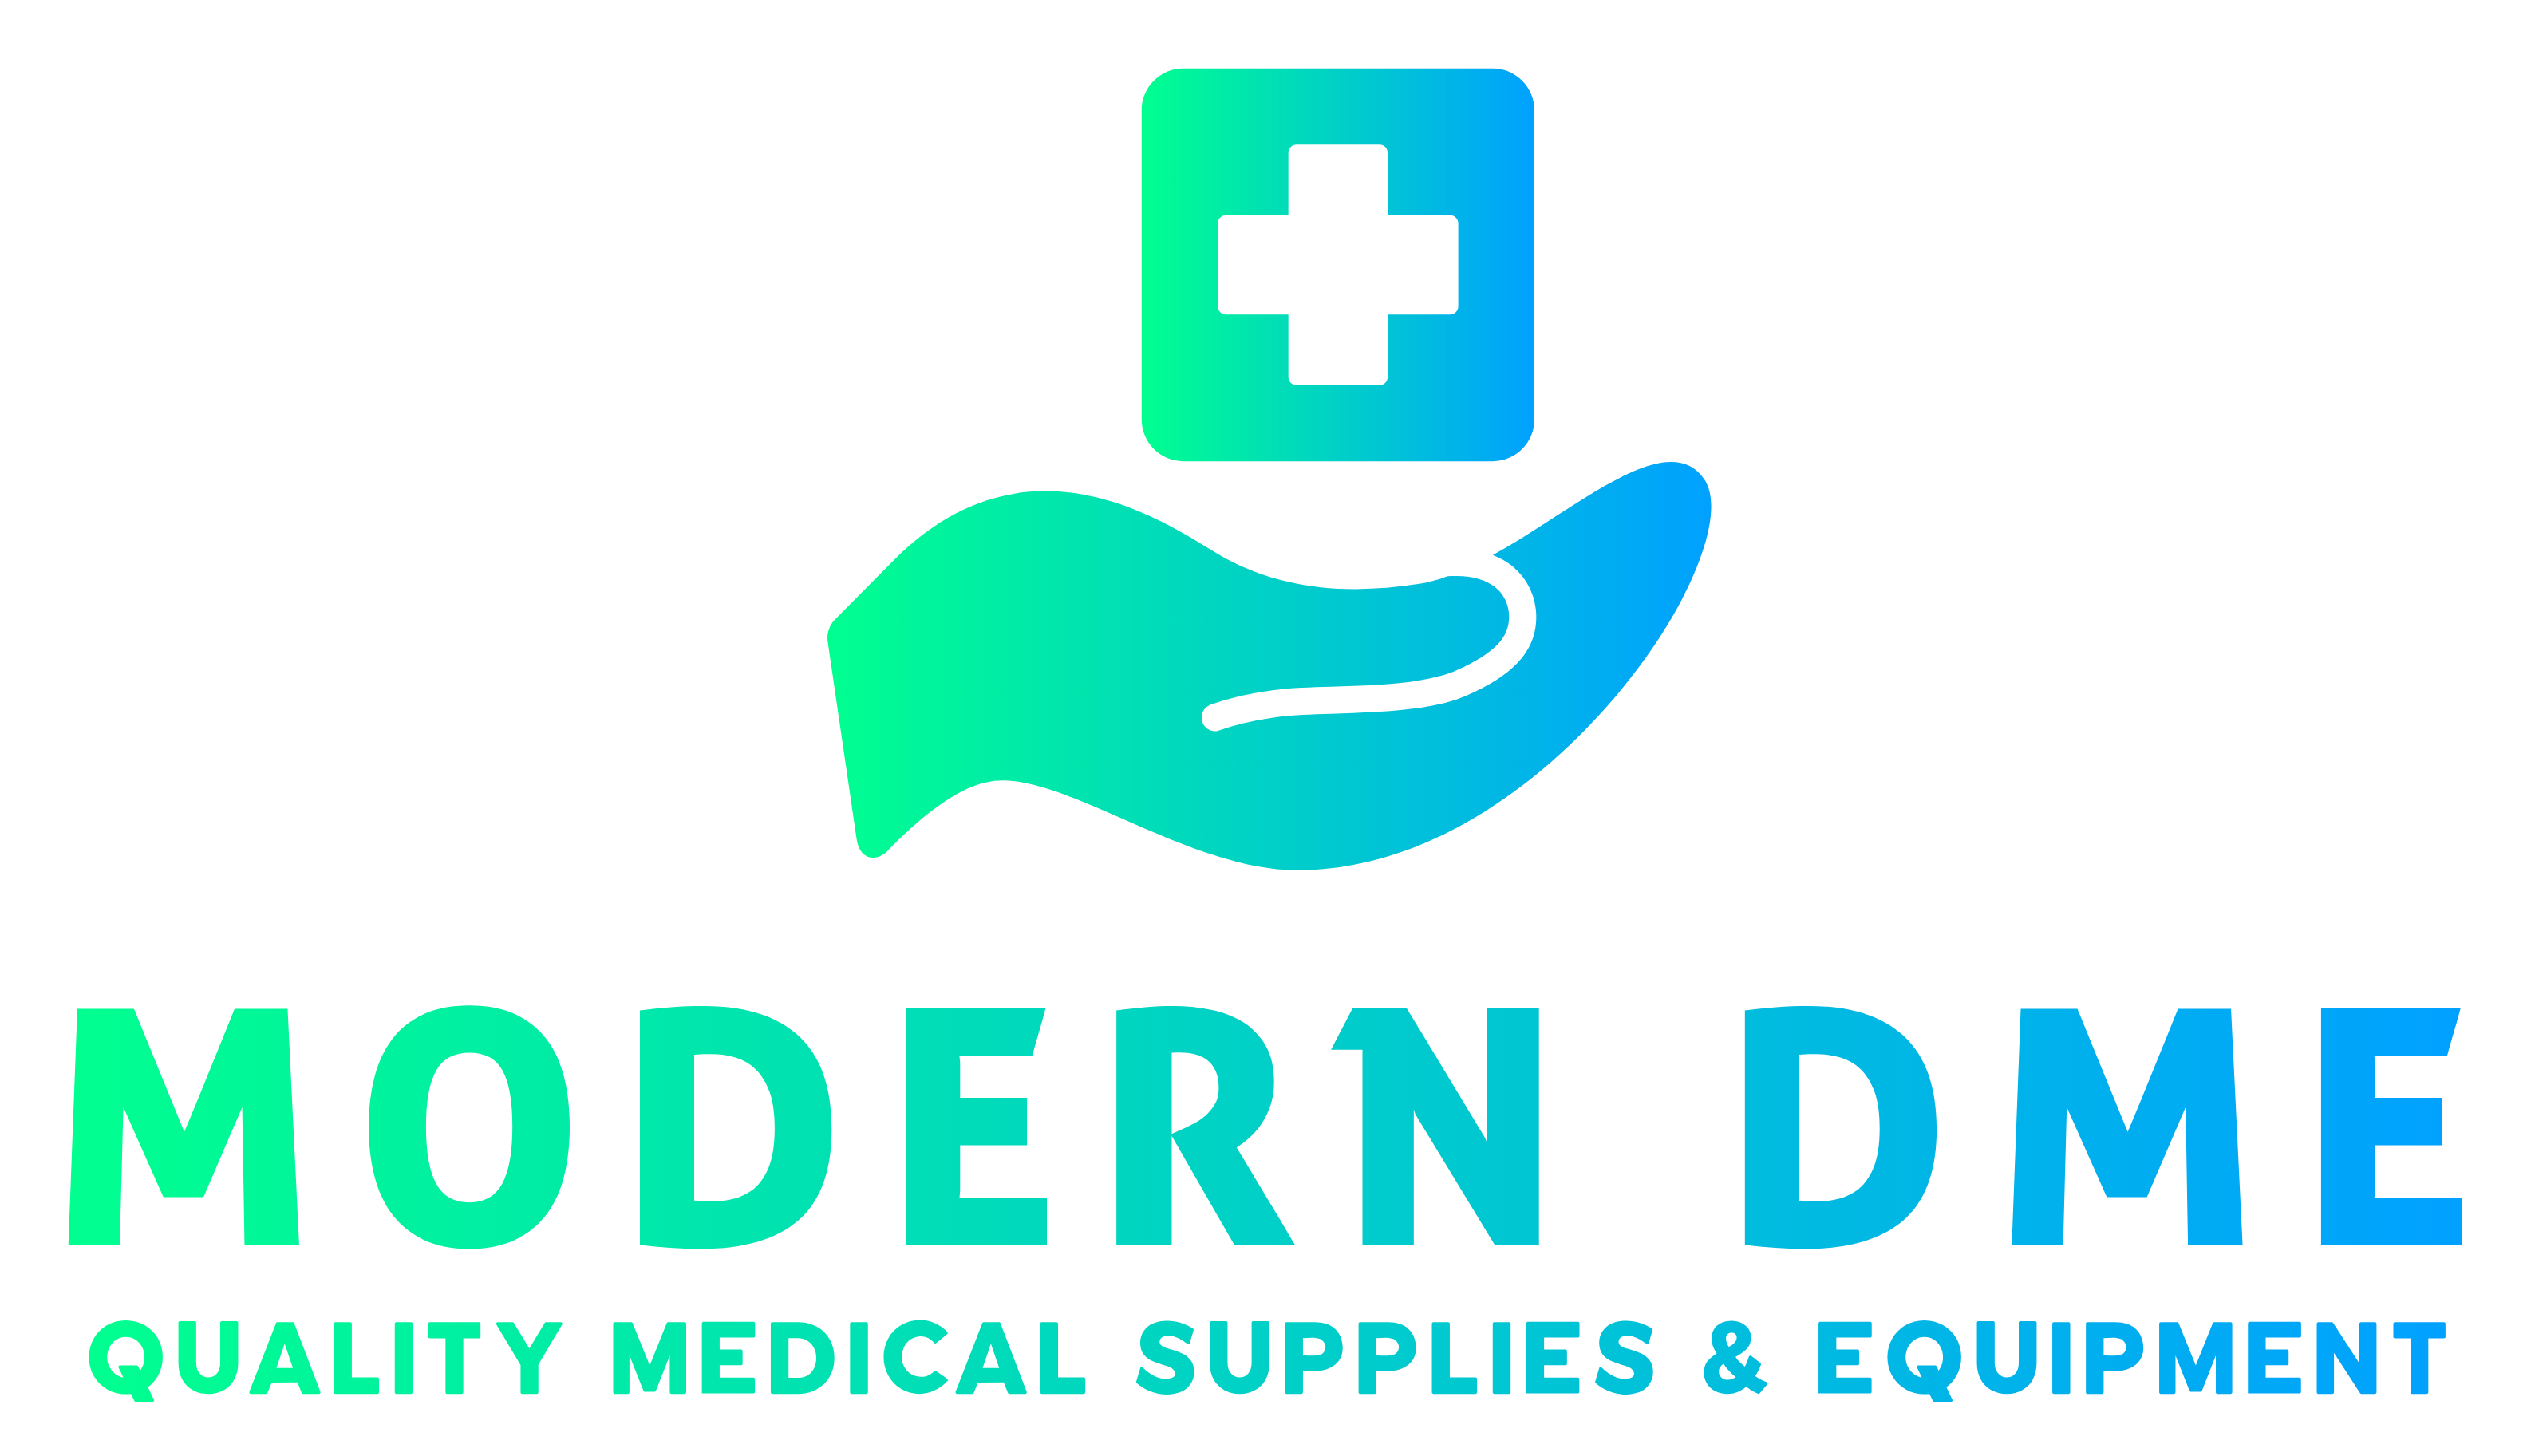 MODERN DME MEDICAL SUPPLIES AND EQUIPMENT